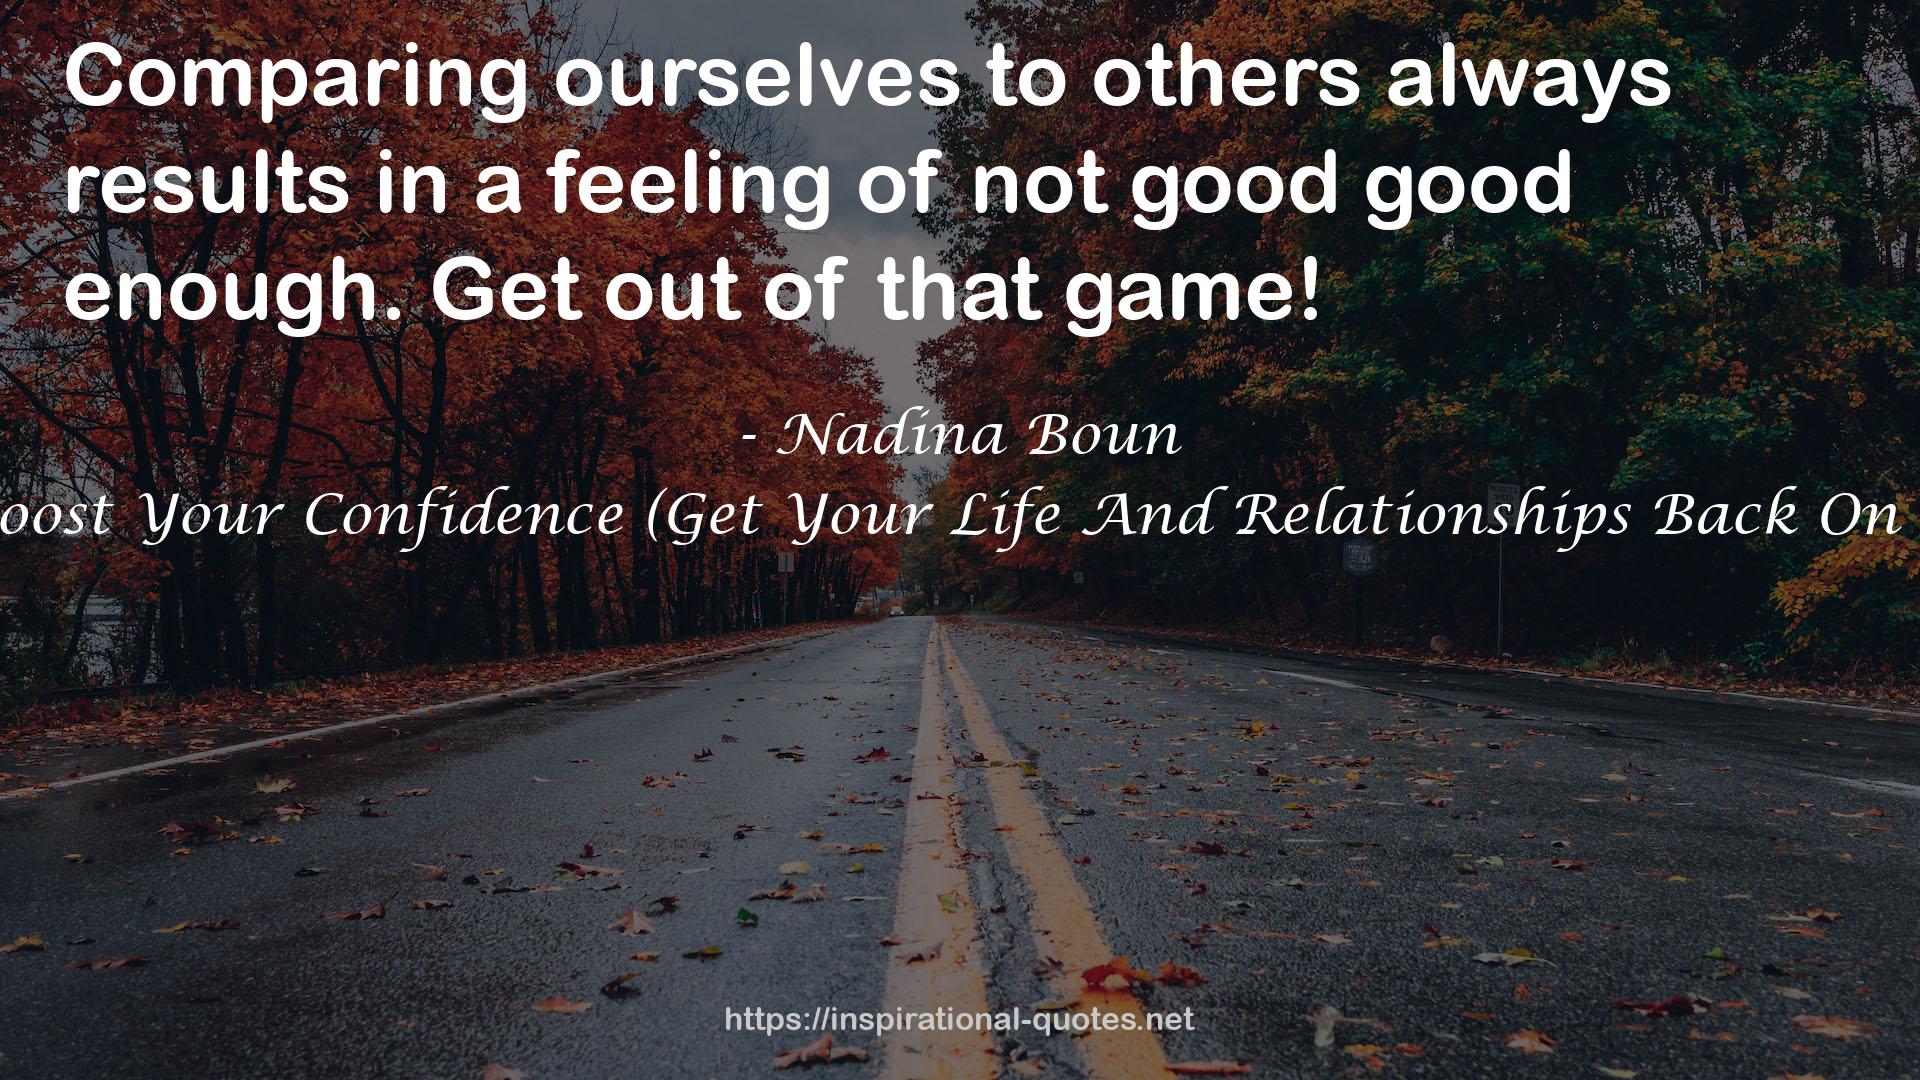 21 Ways To Boost Your Confidence (Get Your Life And Relationships Back On Track Book 1) QUOTES